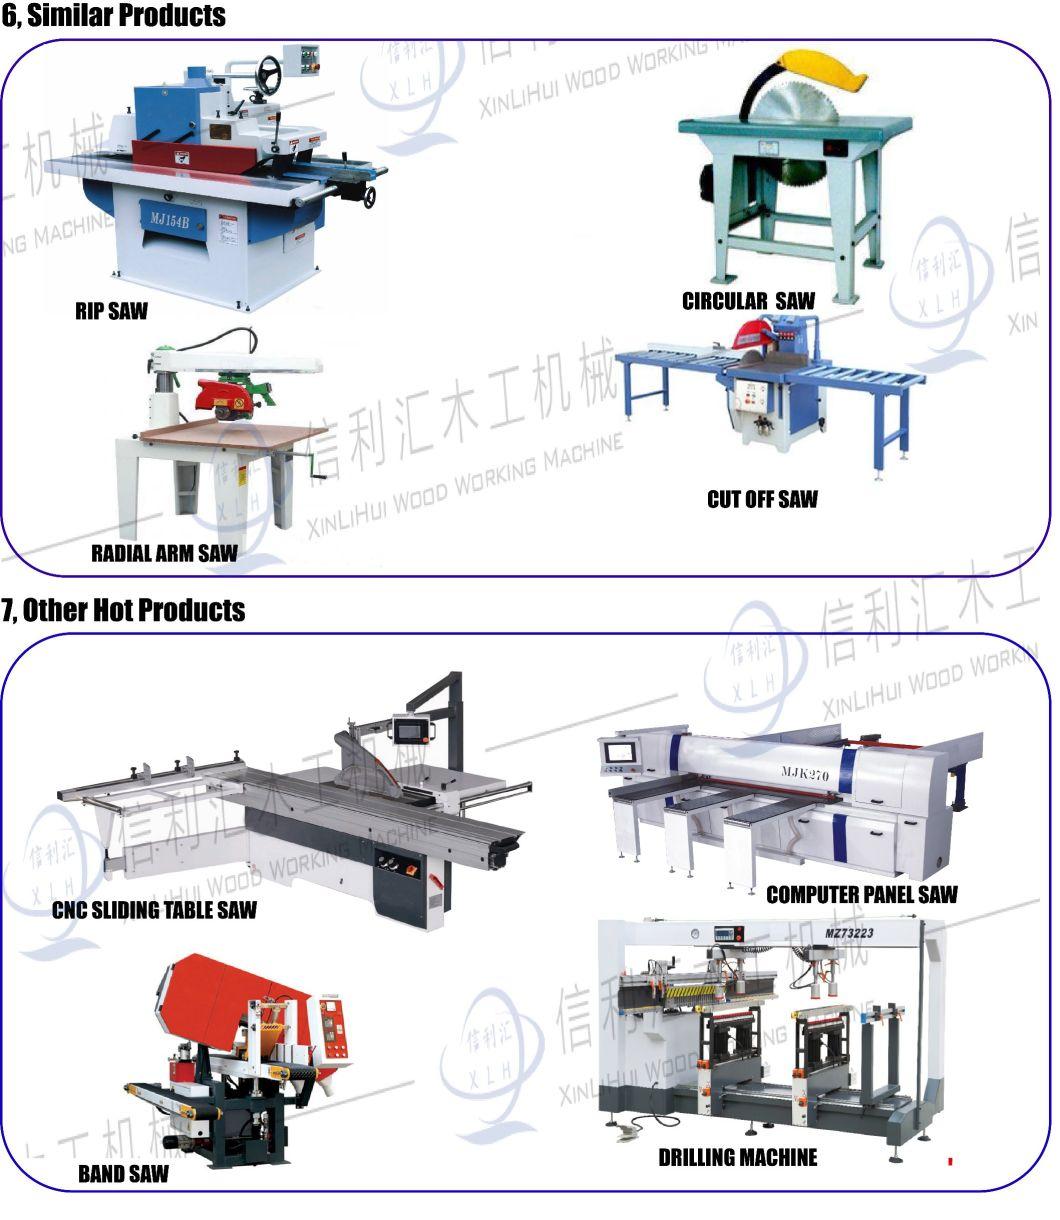 Product CNC Beam Sawing Machine for High-Quality Handmade Furniture